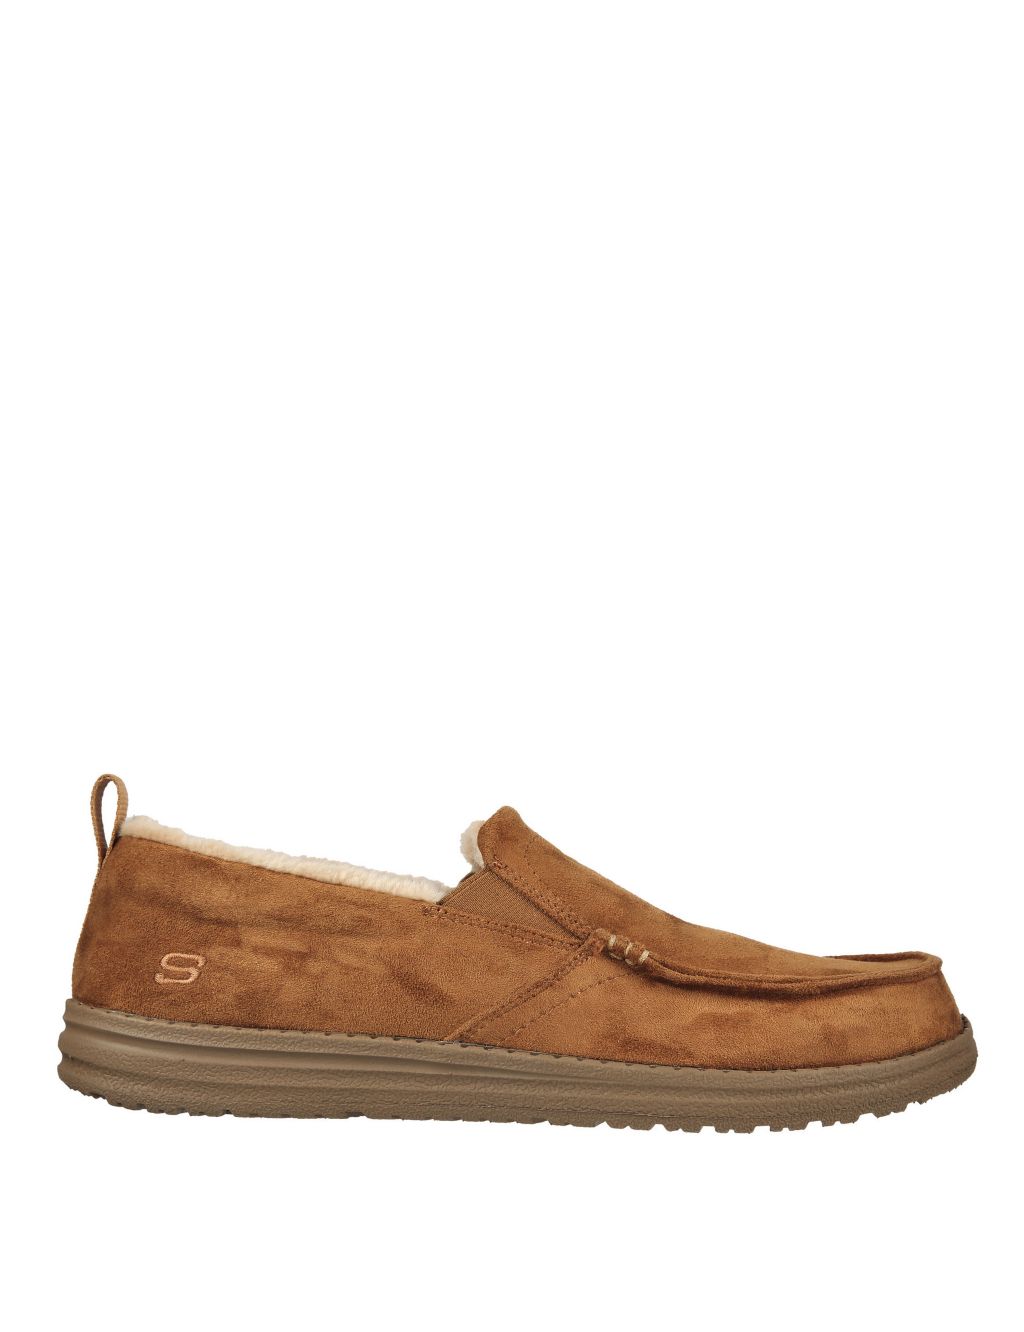 Melson Willmore Moccasin Slippers | Skechers | M&S